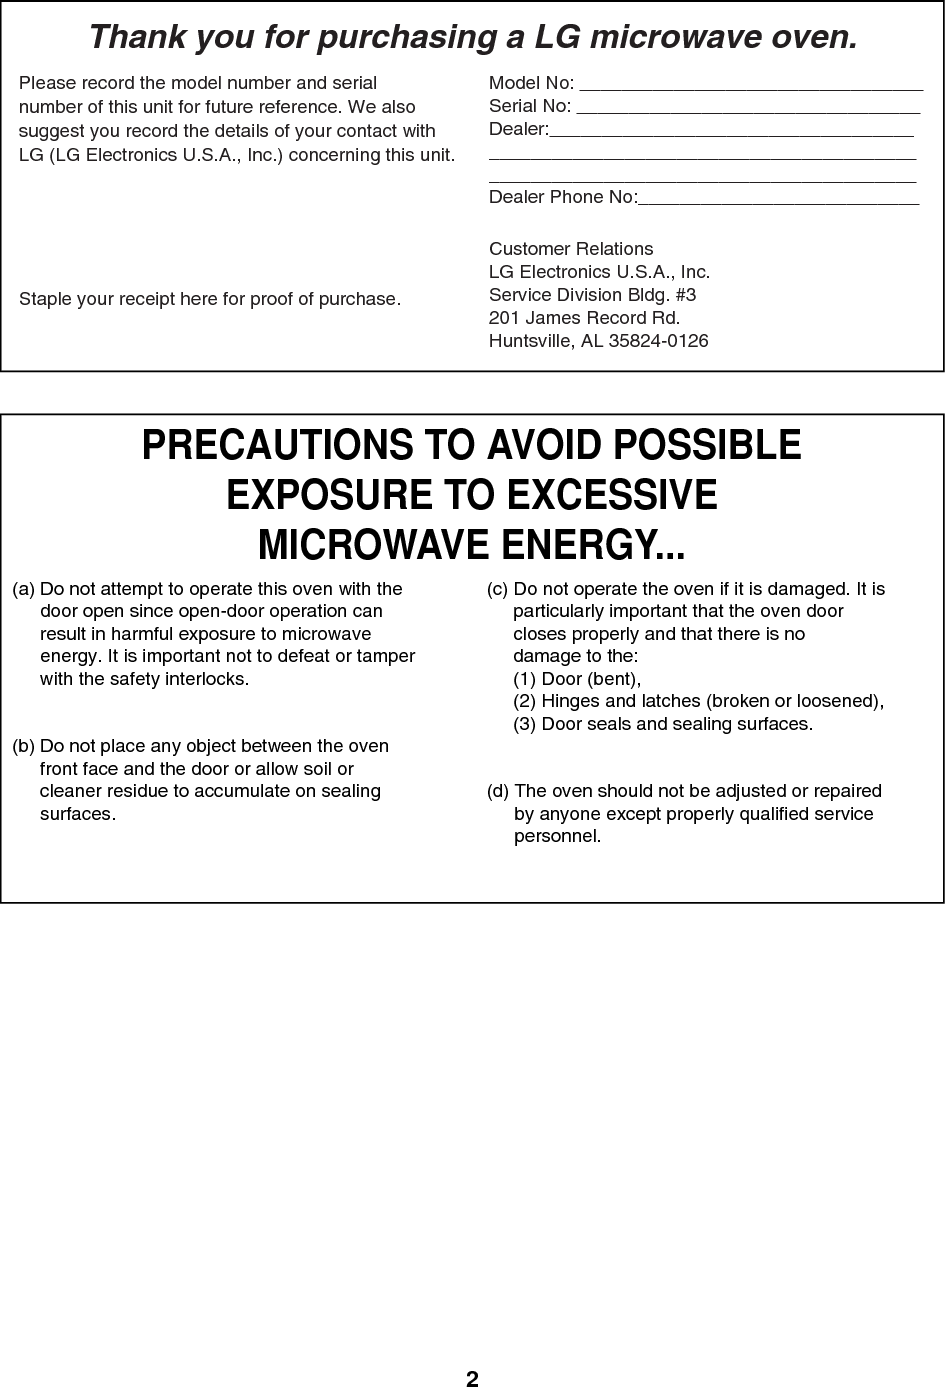 2PRECAUTIONS TO AVOID POSSIBLEEXPOSURE TO EXCESSIVEMICROWAVE ENERGY...(a) Do not attempt to operate this oven with thedoor open since open-door operation canresult in harmful exposure to microwaveenergy. It is important not to defeat or tamperwith the safety interlocks.(b) Do not place any object between the ovenfront face and the door or allow soil orcleaner residue to accumulate on sealingsurfaces.(c) Do not operate the oven if it is damaged. It isparticularly important that the oven doorcloses properly and that there is nodamage to the:(1) Door (bent),(2) Hinges and latches (broken or loosened),(3) Door seals and sealing surfaces.(d) The oven should not be adjusted or repairedby anyone except properly qualified servicepersonnel.Thank you for purchasing a LG microwave oven.Please record the model number and serialnumber of this unit for future reference. We alsosuggest you record the details of your contact withLG (LG Electronics U.S.A., Inc.) concerning this unit.Staple your receipt here for proof of purchase.Model No: _________________________________Serial No: _________________________________Dealer:_____________________________________________________________________________________________________________________Dealer Phone No:___________________________Customer RelationsLG Electronics U.S.A., Inc.Service Division Bldg. #3201 James Record Rd.Huntsville, AL 35824-0126